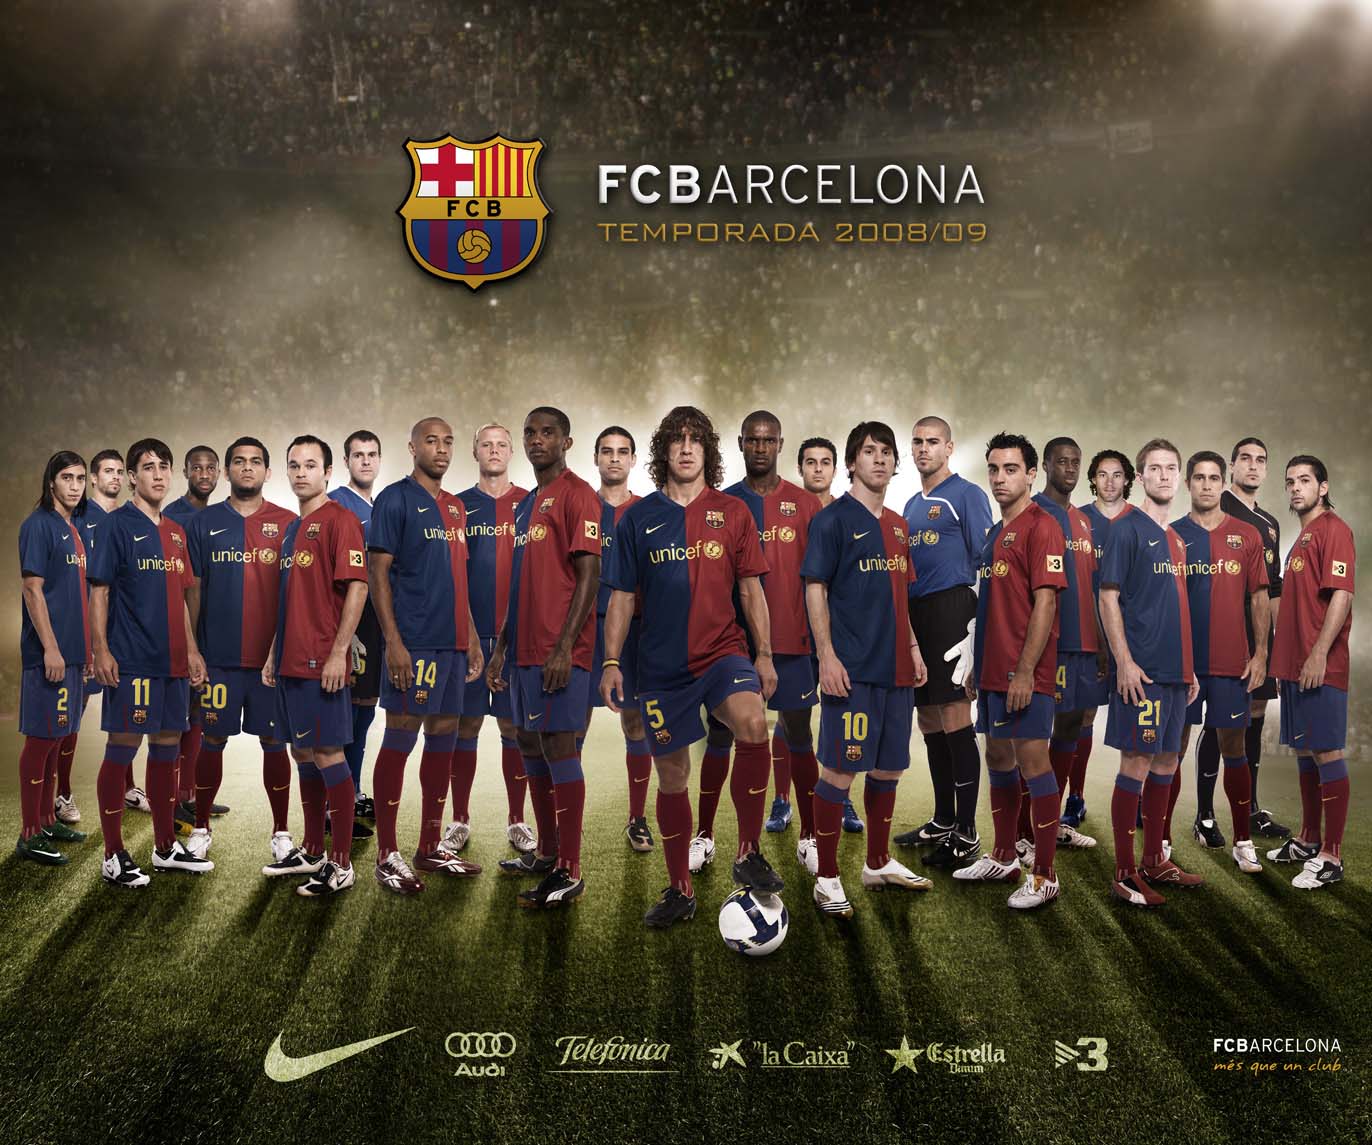 Free download Fc Barcelona cell phone theme [1372x1145] for your